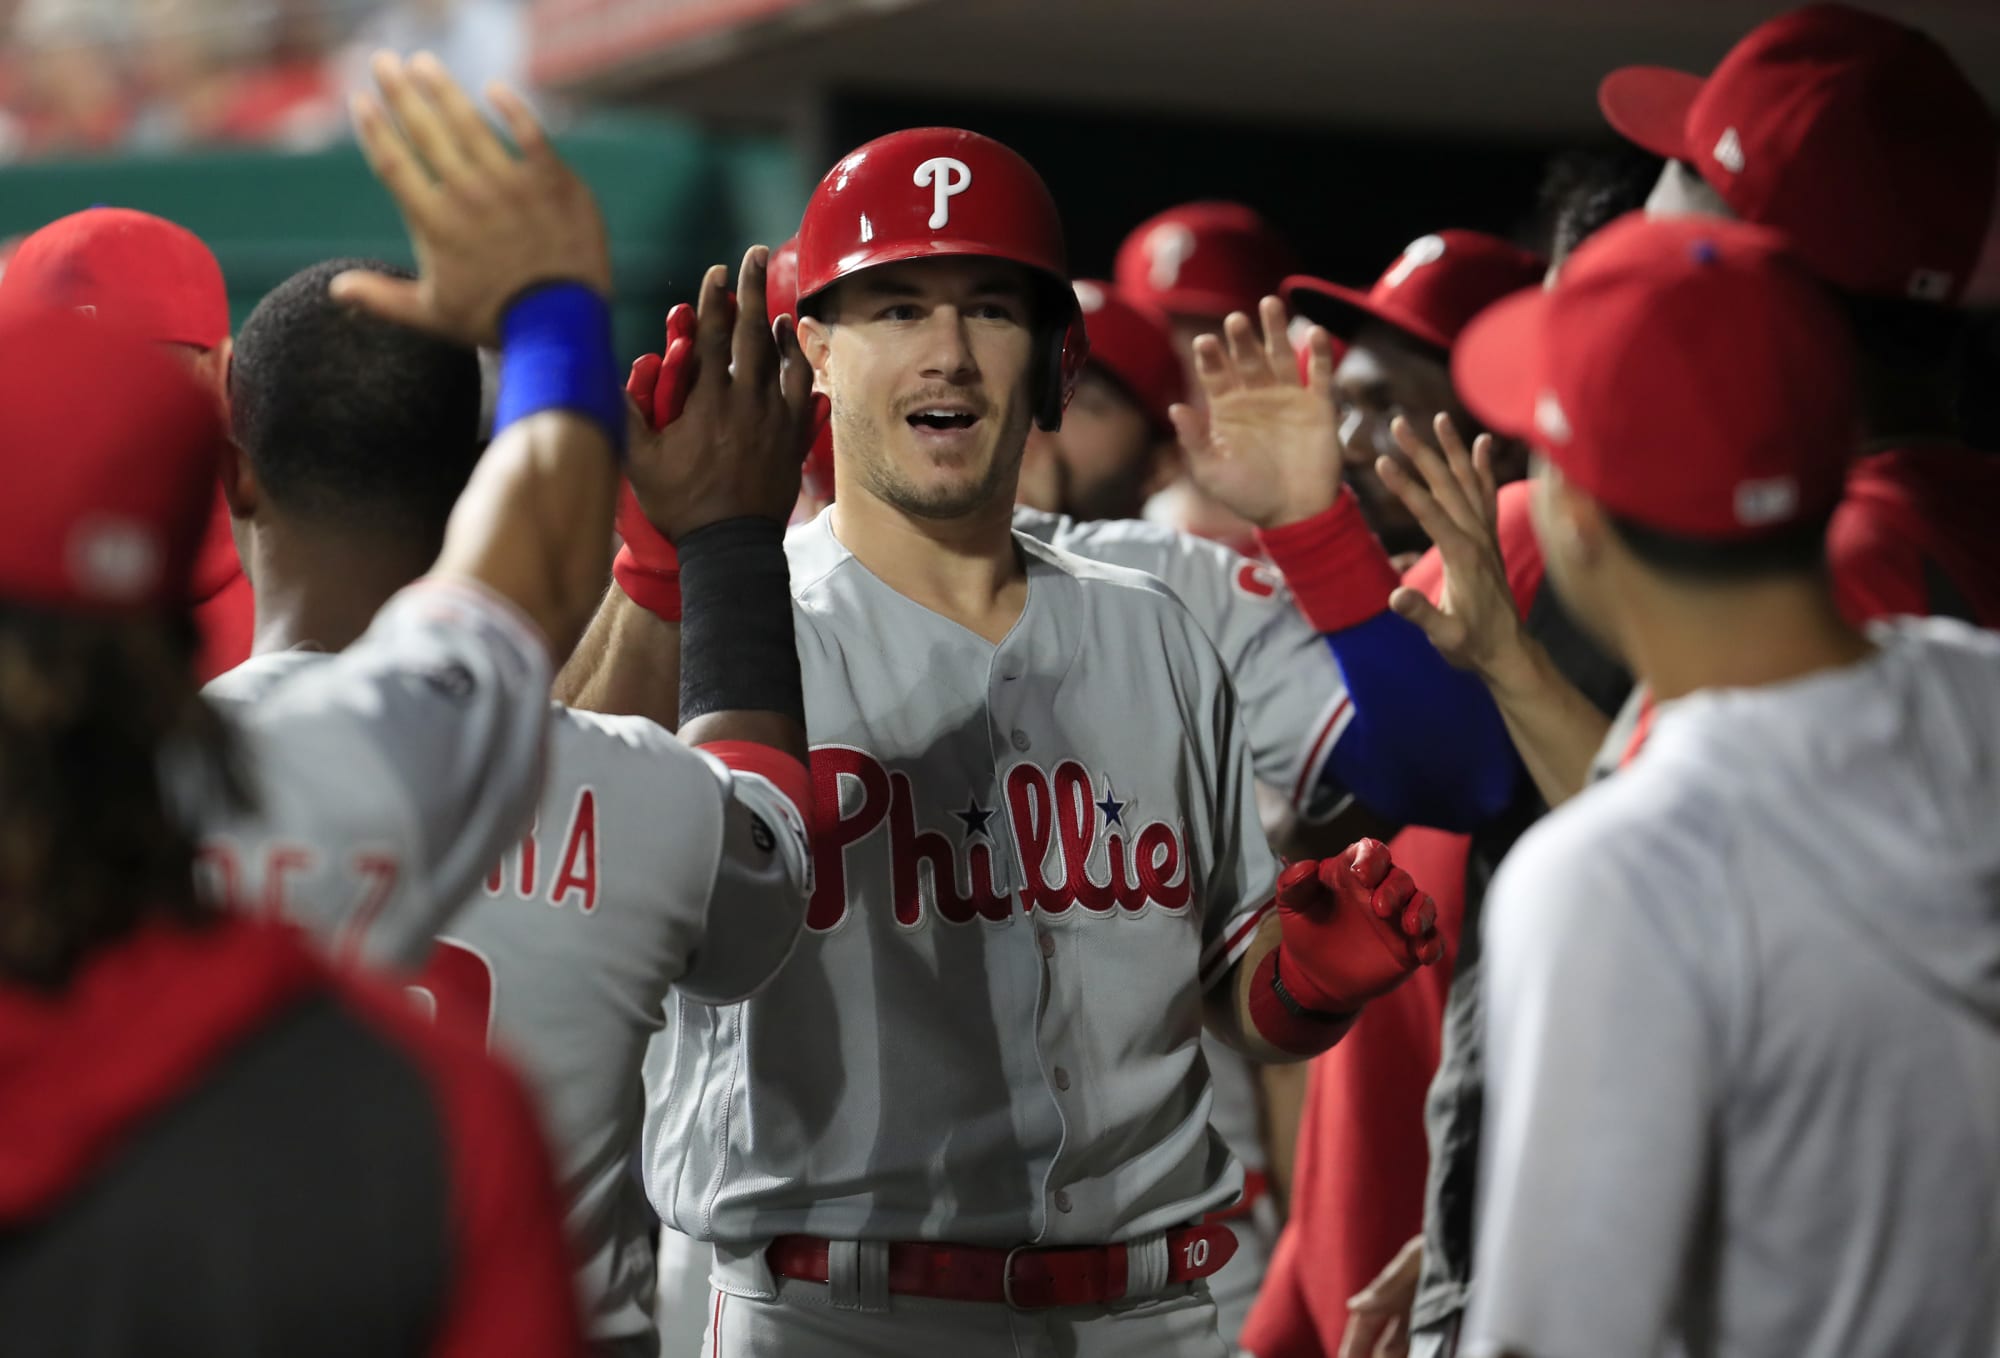 Phillies roster continues to expand, but how much will it help?